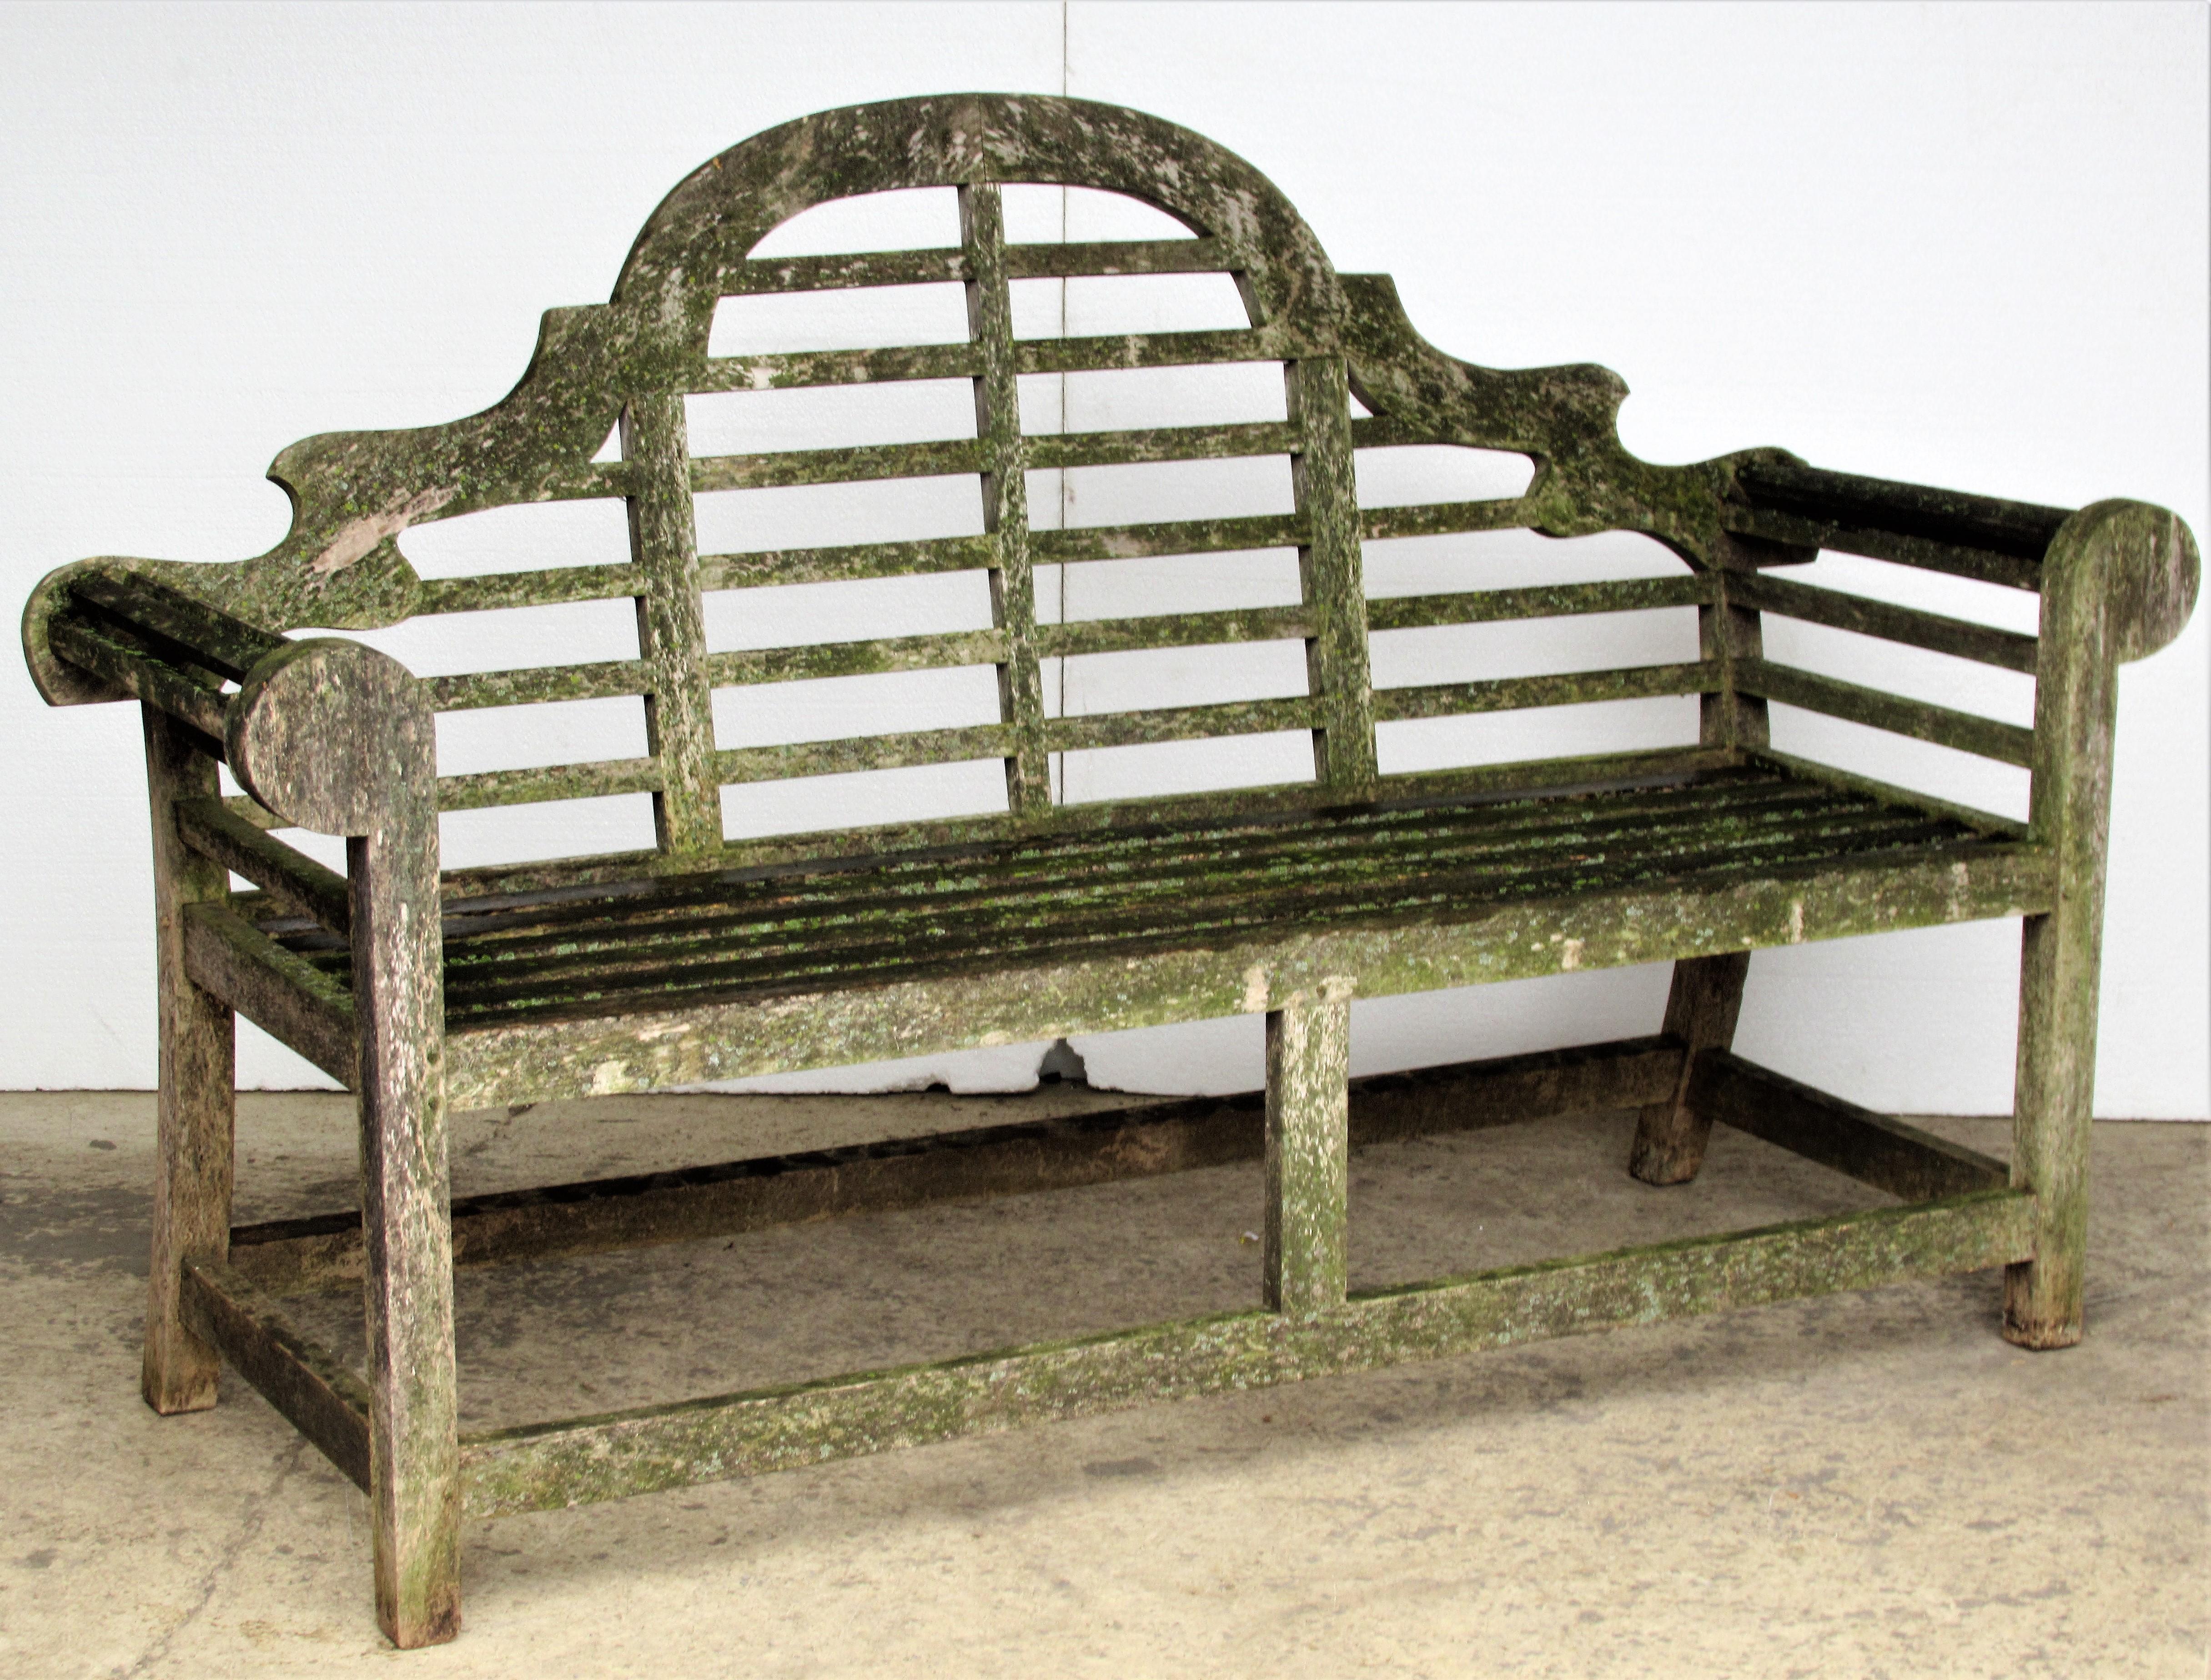 A very high quality vintage teak Lutyens style garden bench with wood pegged construction in the best aged weathered surface profusely encrusted with old algae lichen growth. Best guess this bench dates from the last quarter of the 20th century.